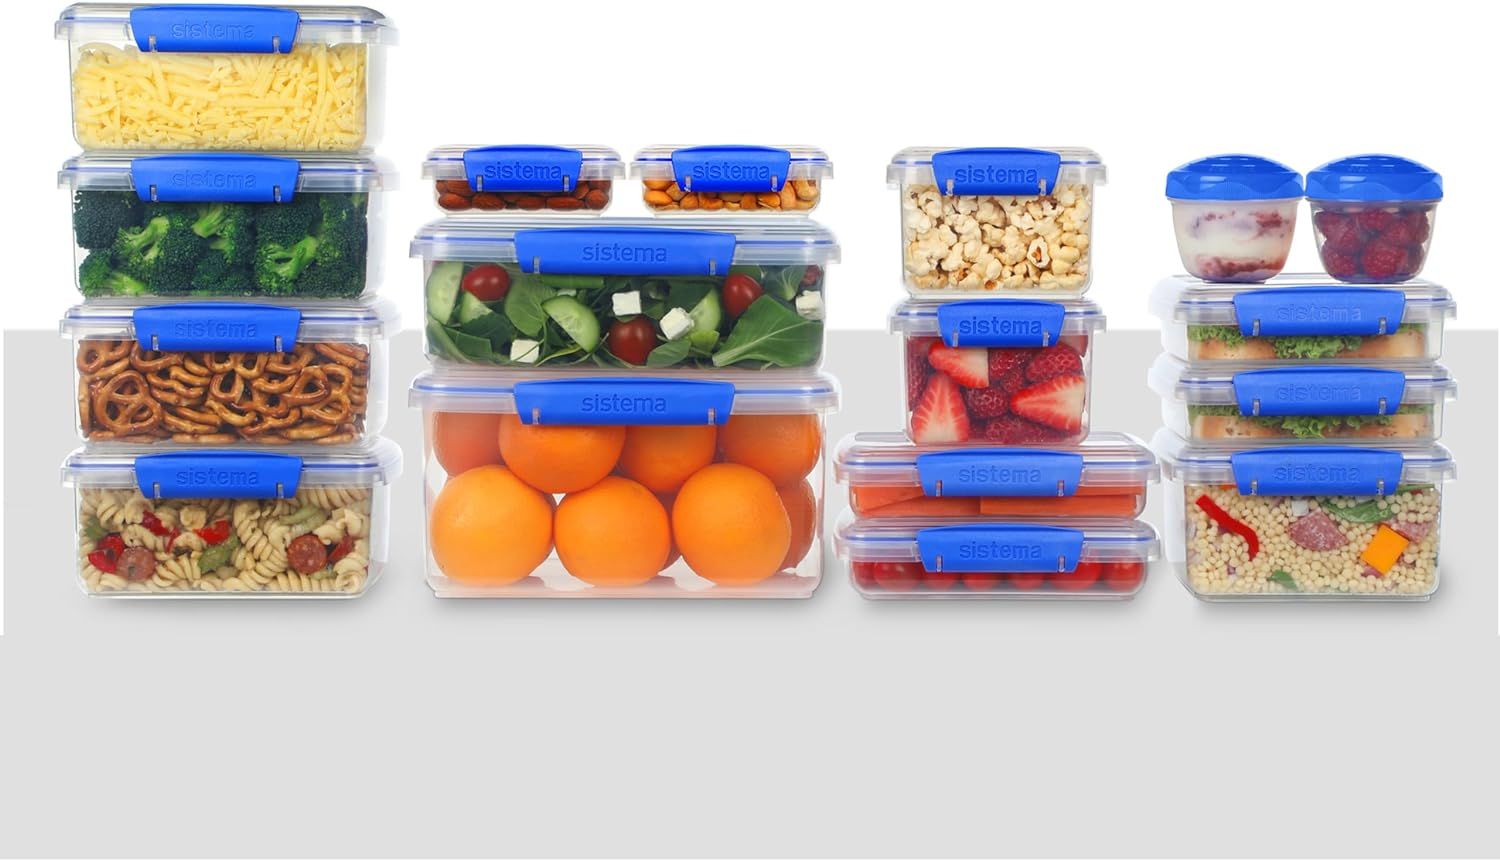 Sistema To Go Collection 820ml/3.4 Cups Multi Split Food Storage Container